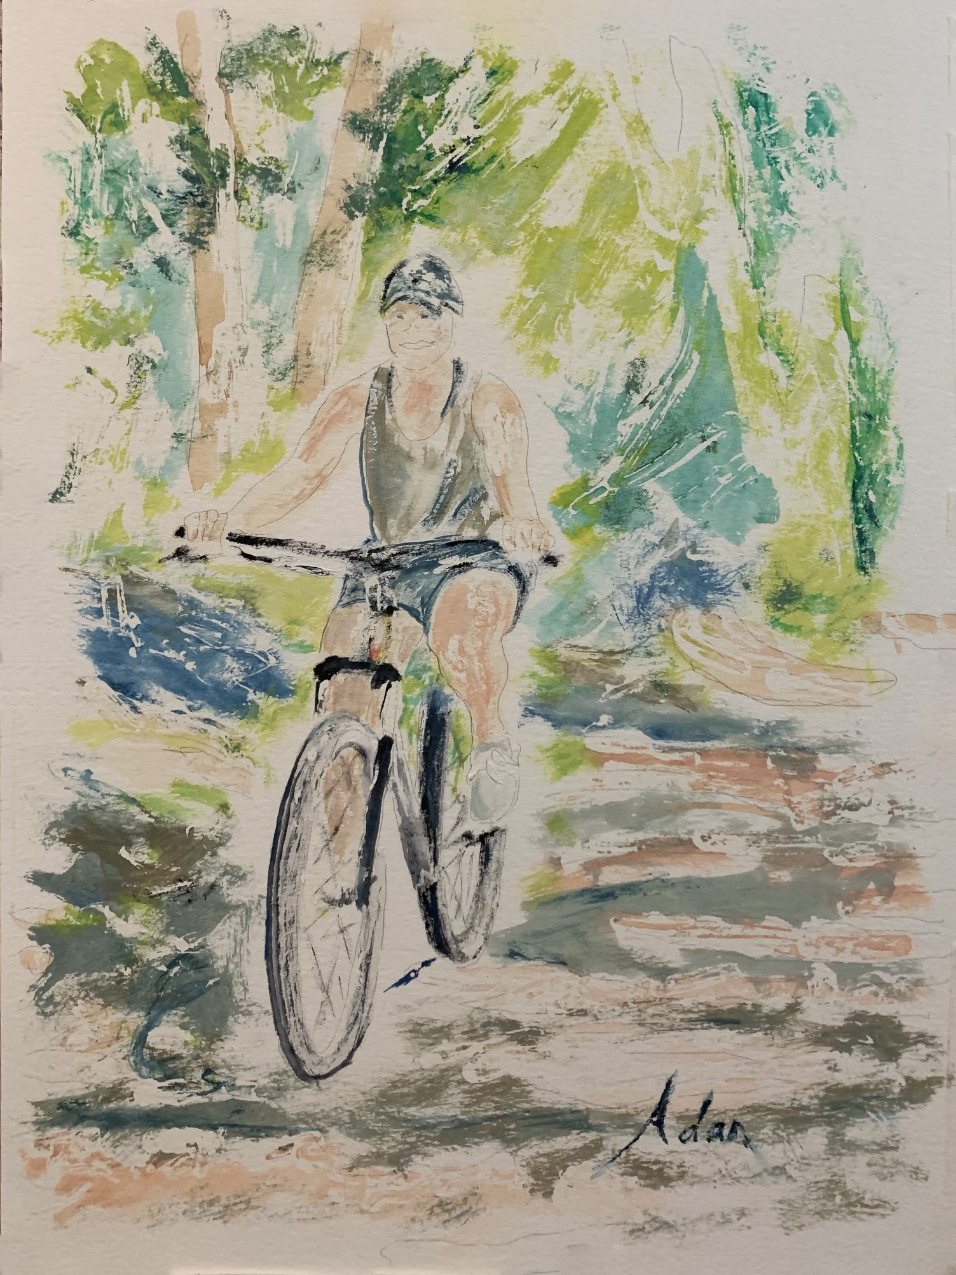 October 08, 2021 – Girl on Bicycle Study 1 v2, #Watercolor on Paper; Masking Fluid Removed, Minor Adjustments = Similar Yet Different Picture : Calling it Done!